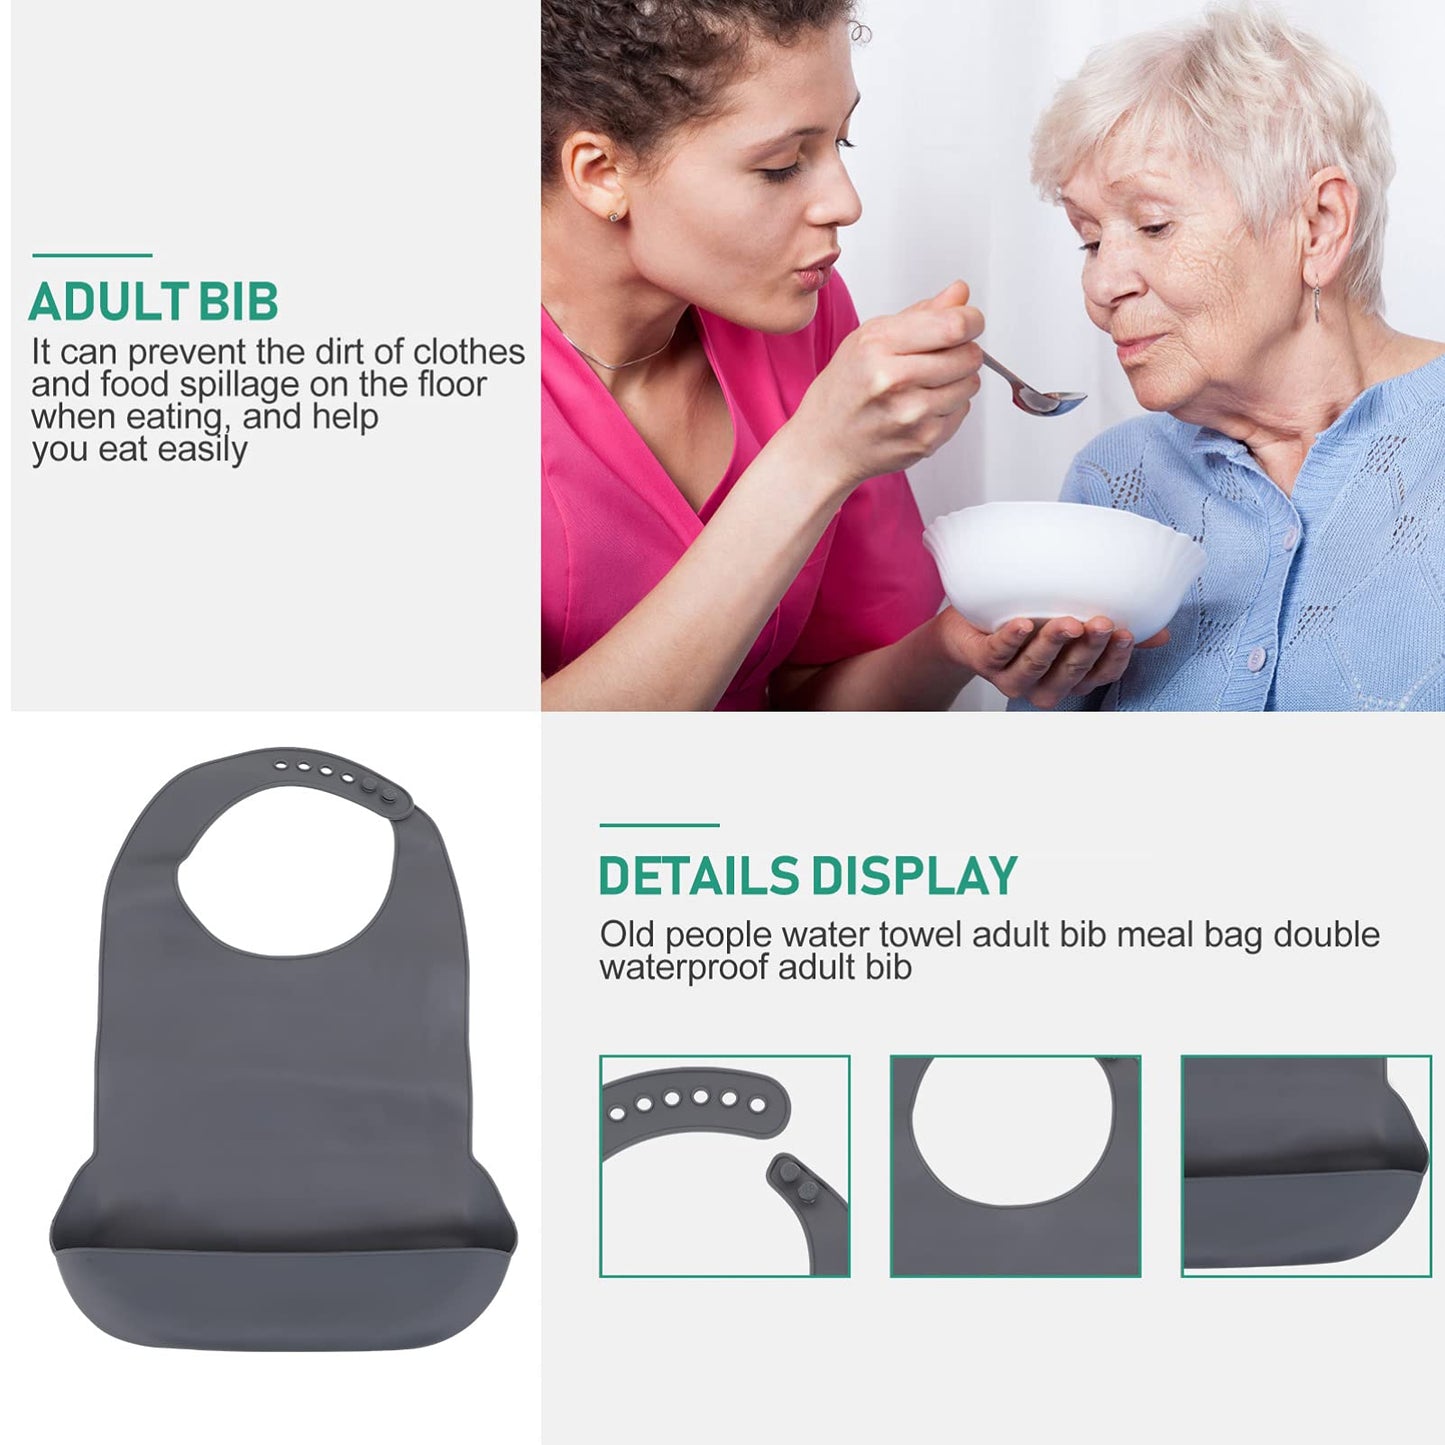 Healifty Silicone Adult Bib Waterproof Eating Bib Washable Adjustable Clothing Protector Reusable Apron Mealtime Cloth with Crumb Catcher Pocket for Elderly Disabled Grey